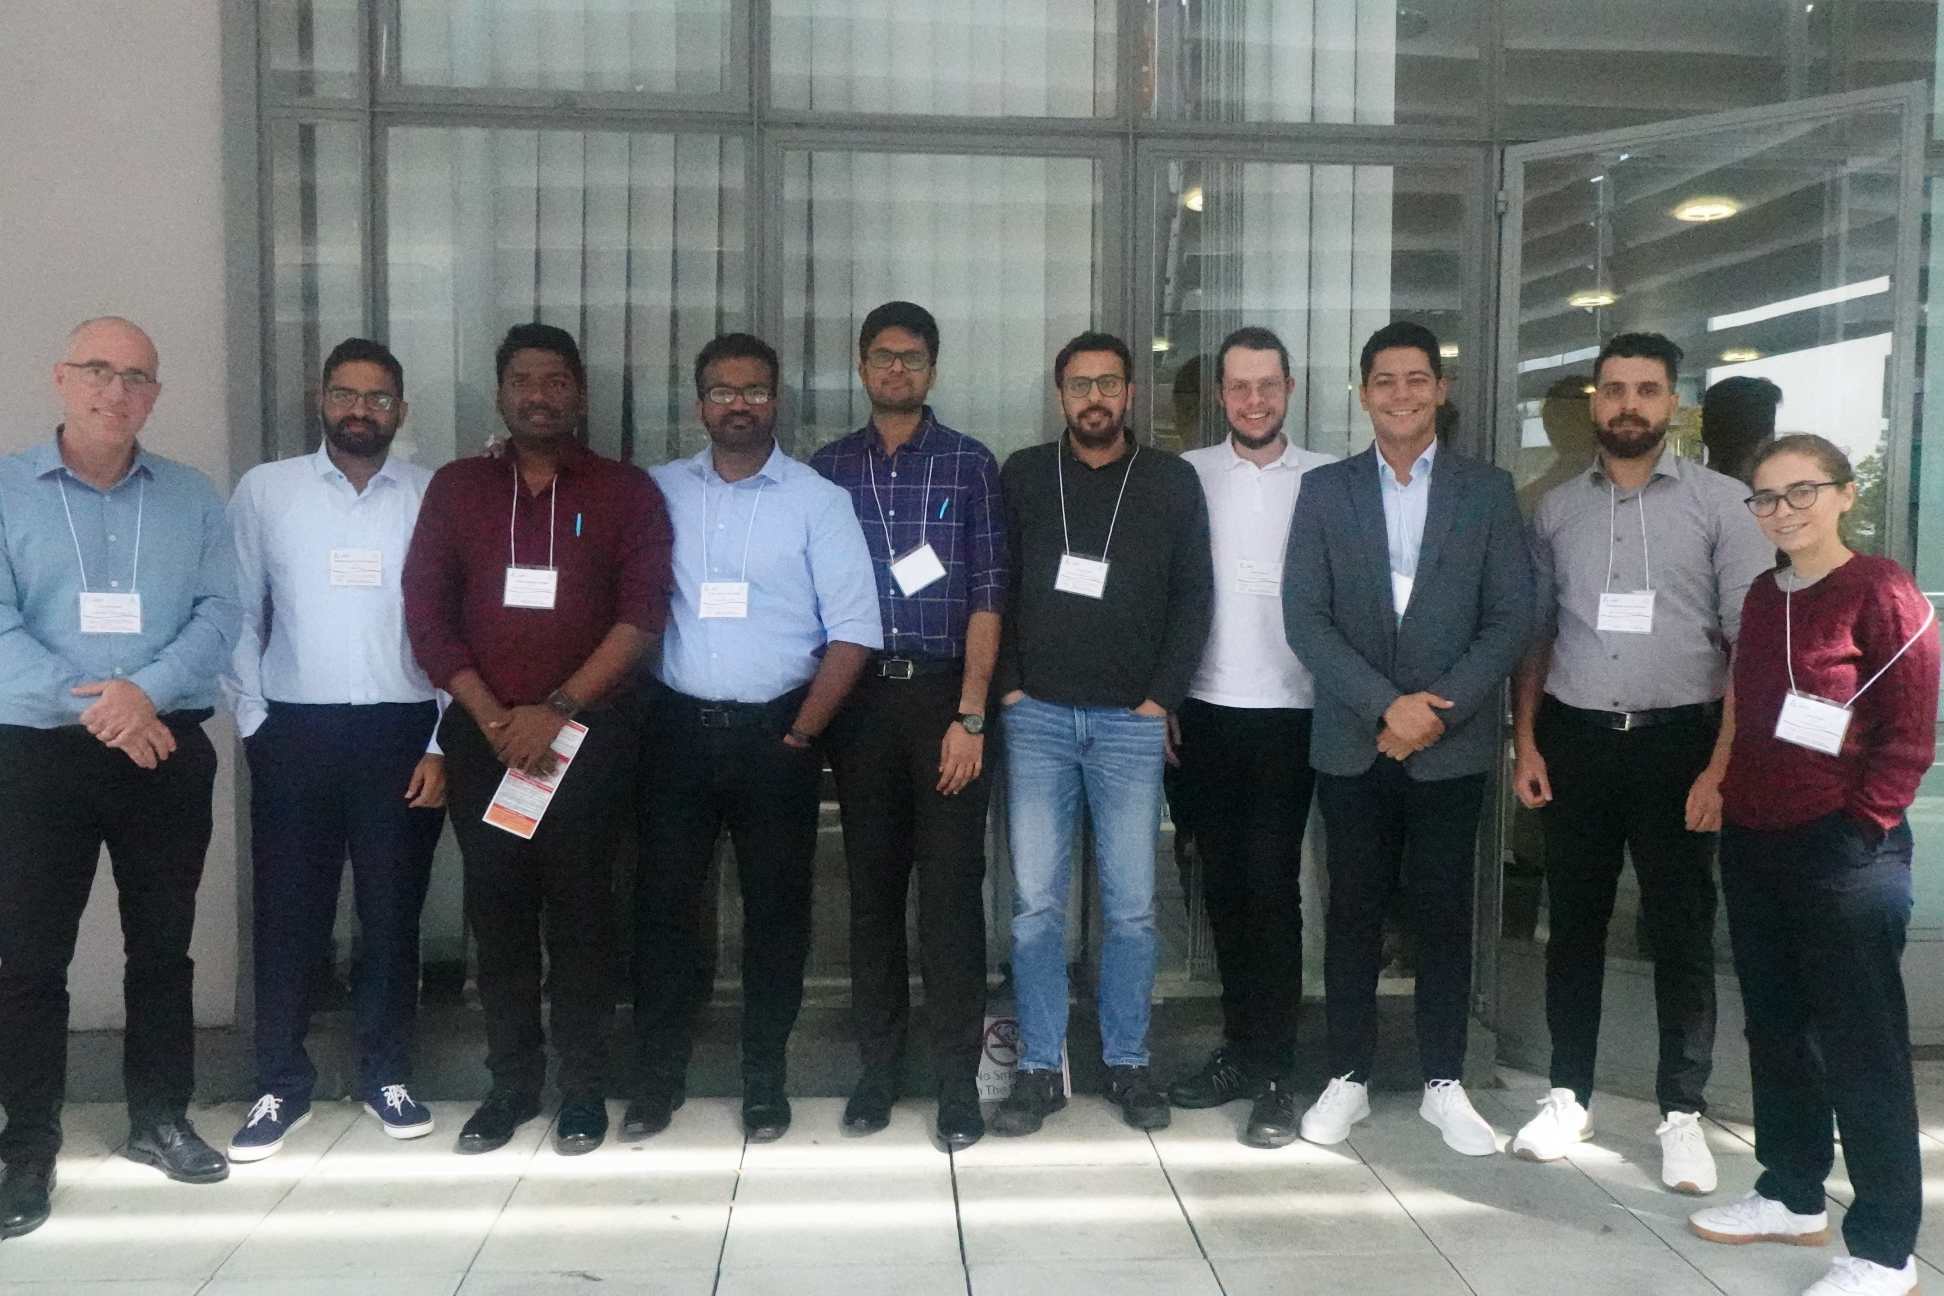 9th World Congress on Mechanical, Chemical, and Material Engineering (MCM 2023) - August 06, 2023 - August 08, 2023 | Brunel University, London, United Kingdom - Event Photos